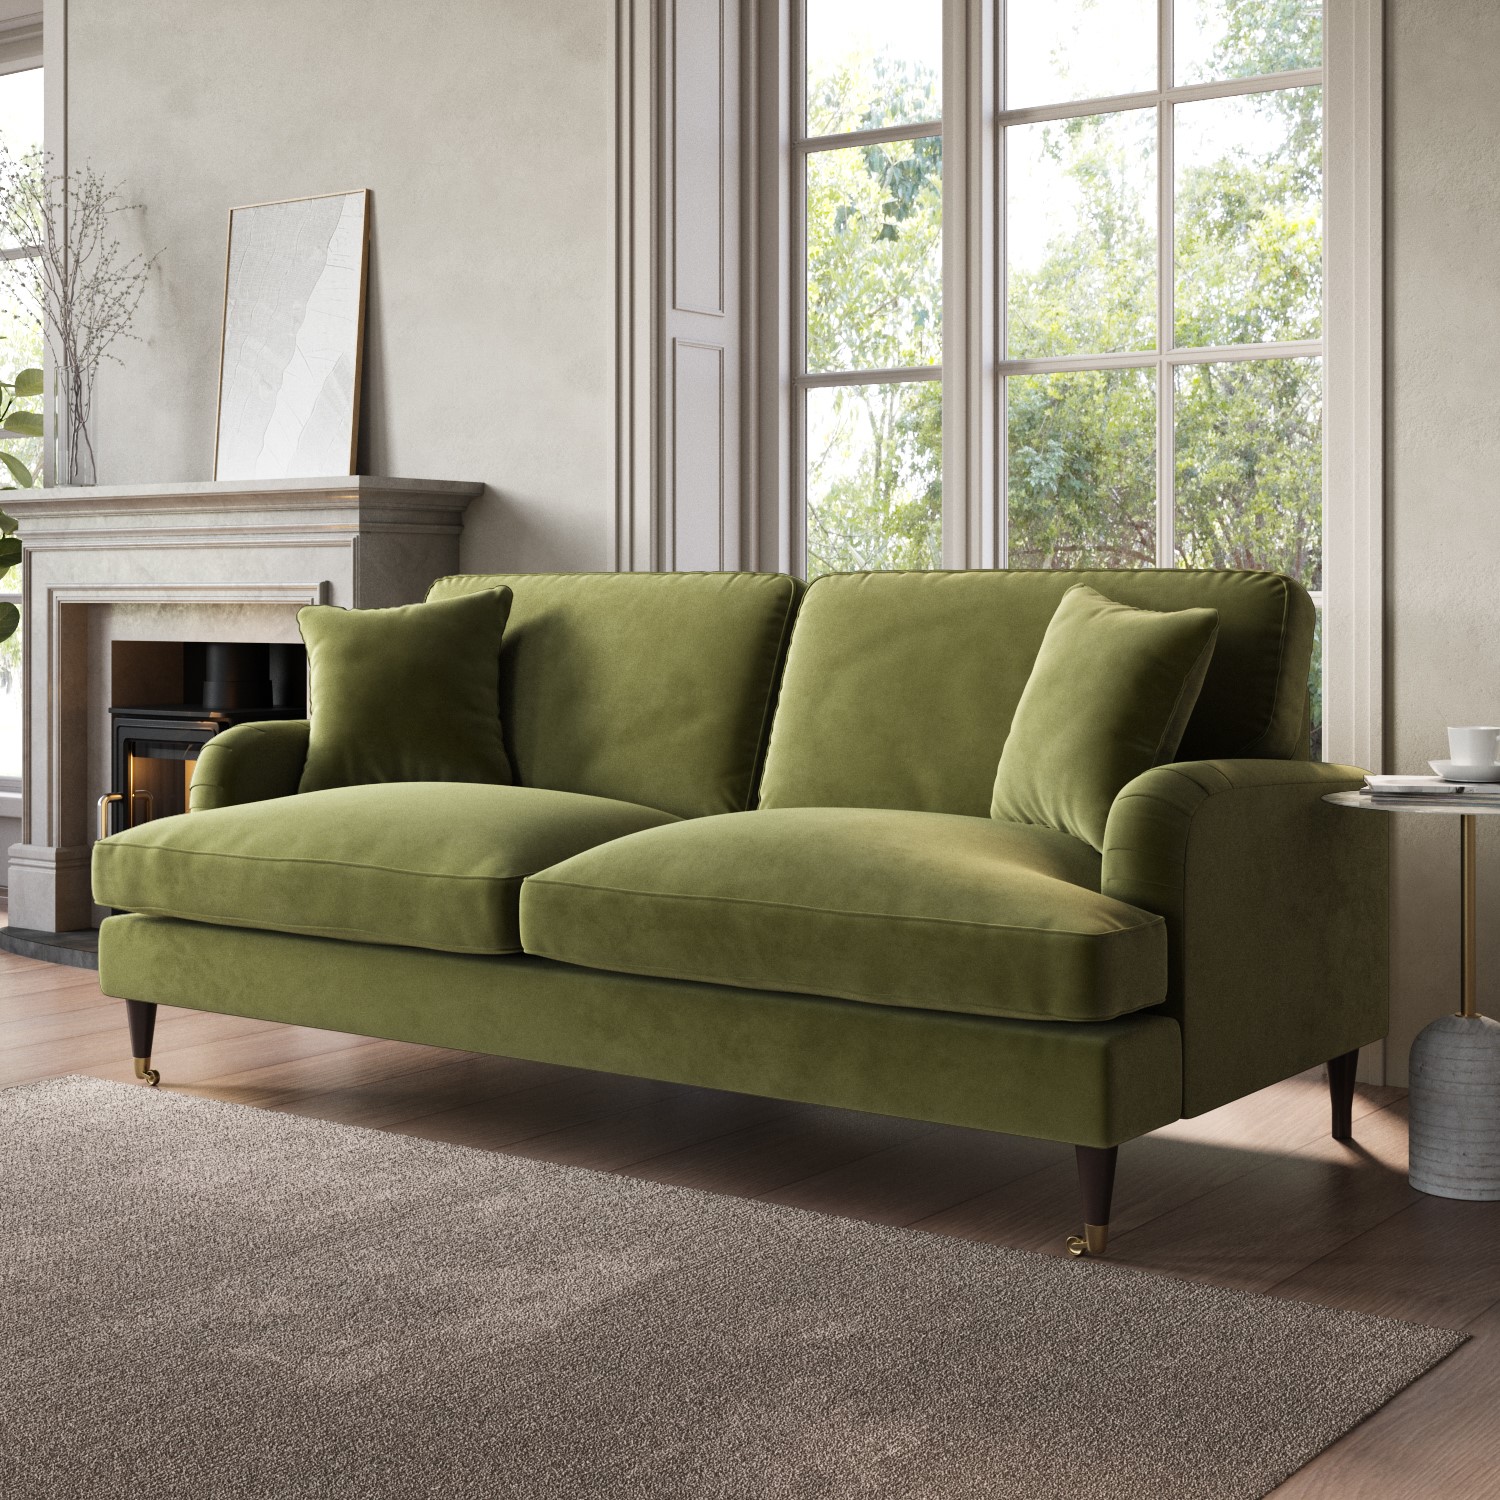 Read more about Olive green velvet 3 seater sofa payton